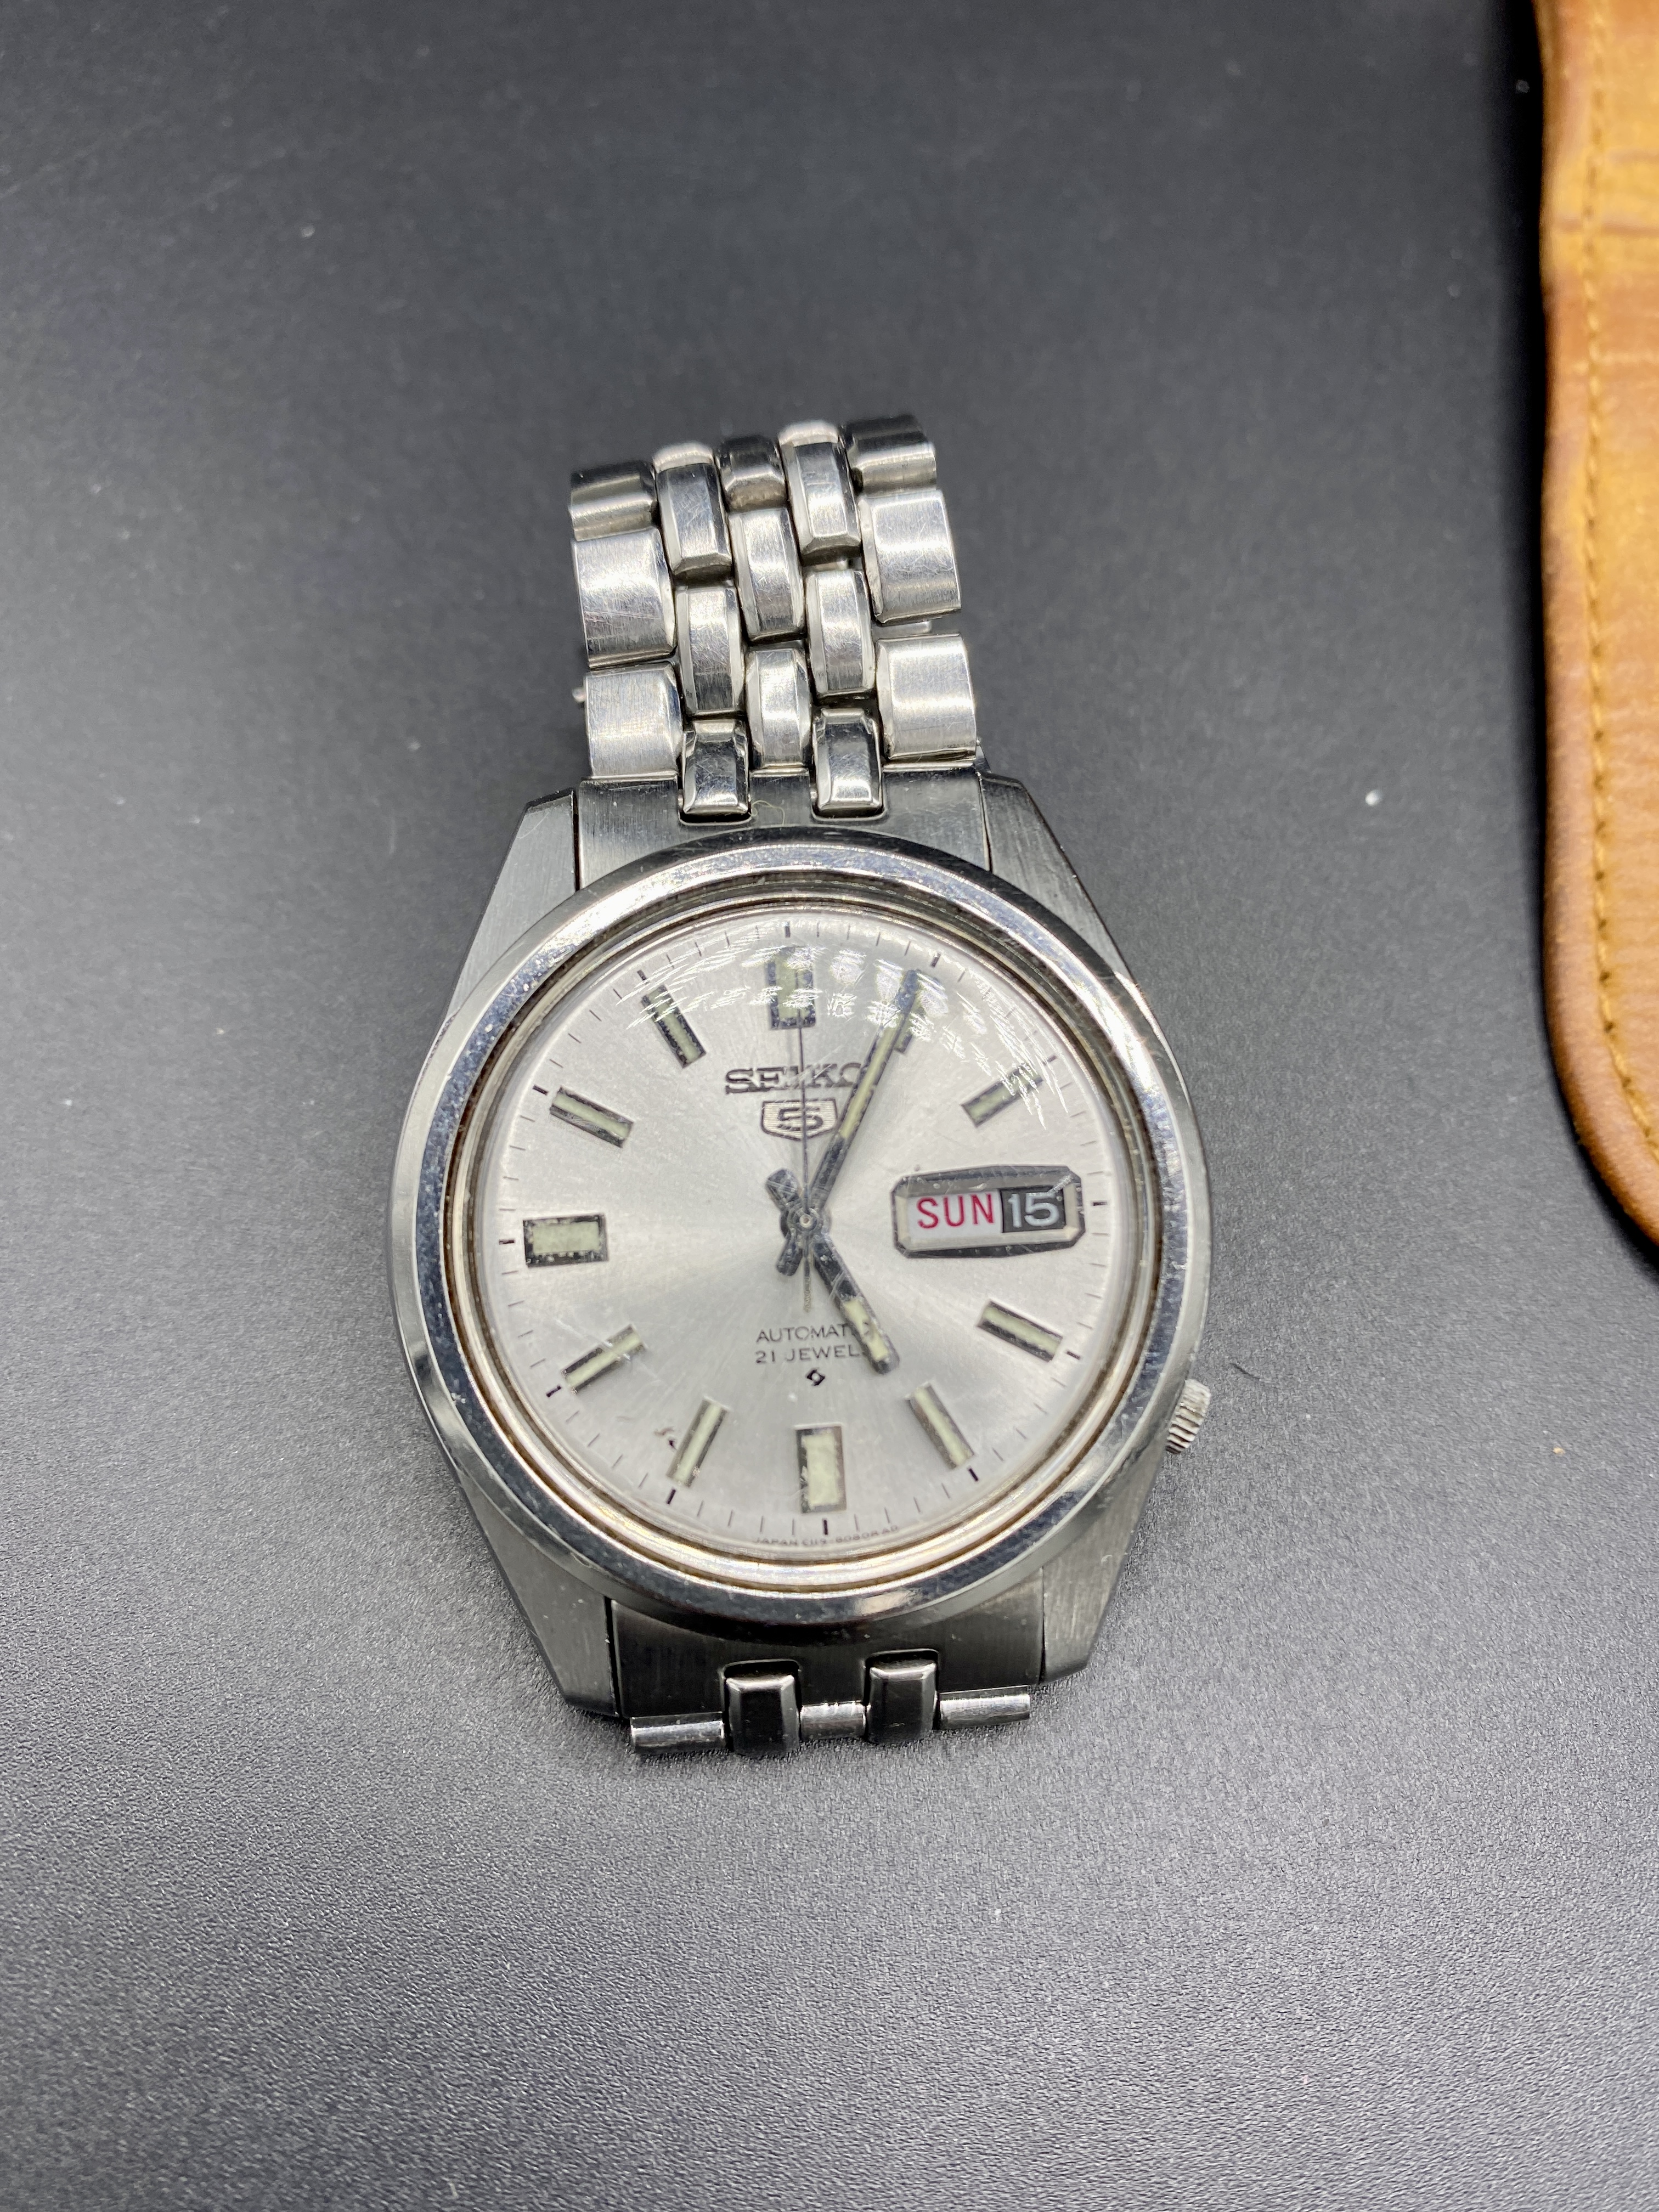 Seiko automatic gent's wrist watch with day and date aperture, with 5 other wrist watches - Image 2 of 7